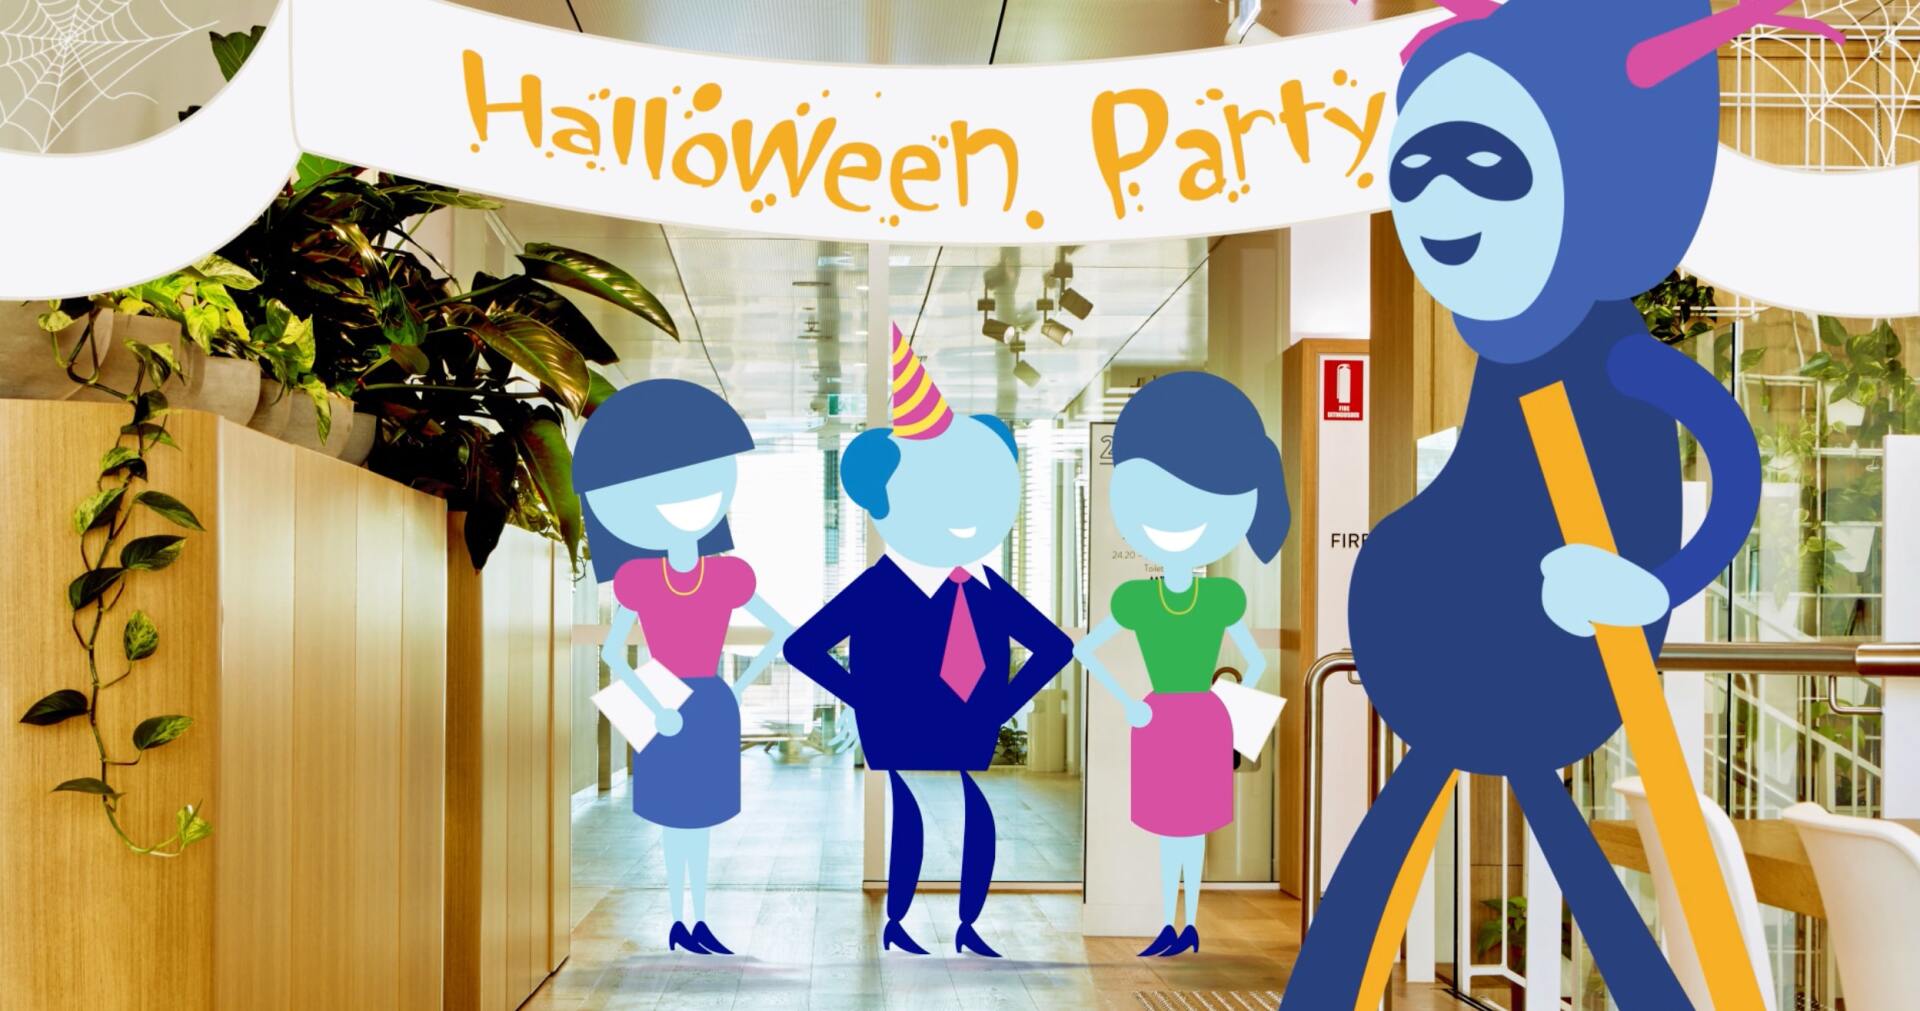 AGL illustrated characters at a Halloween party